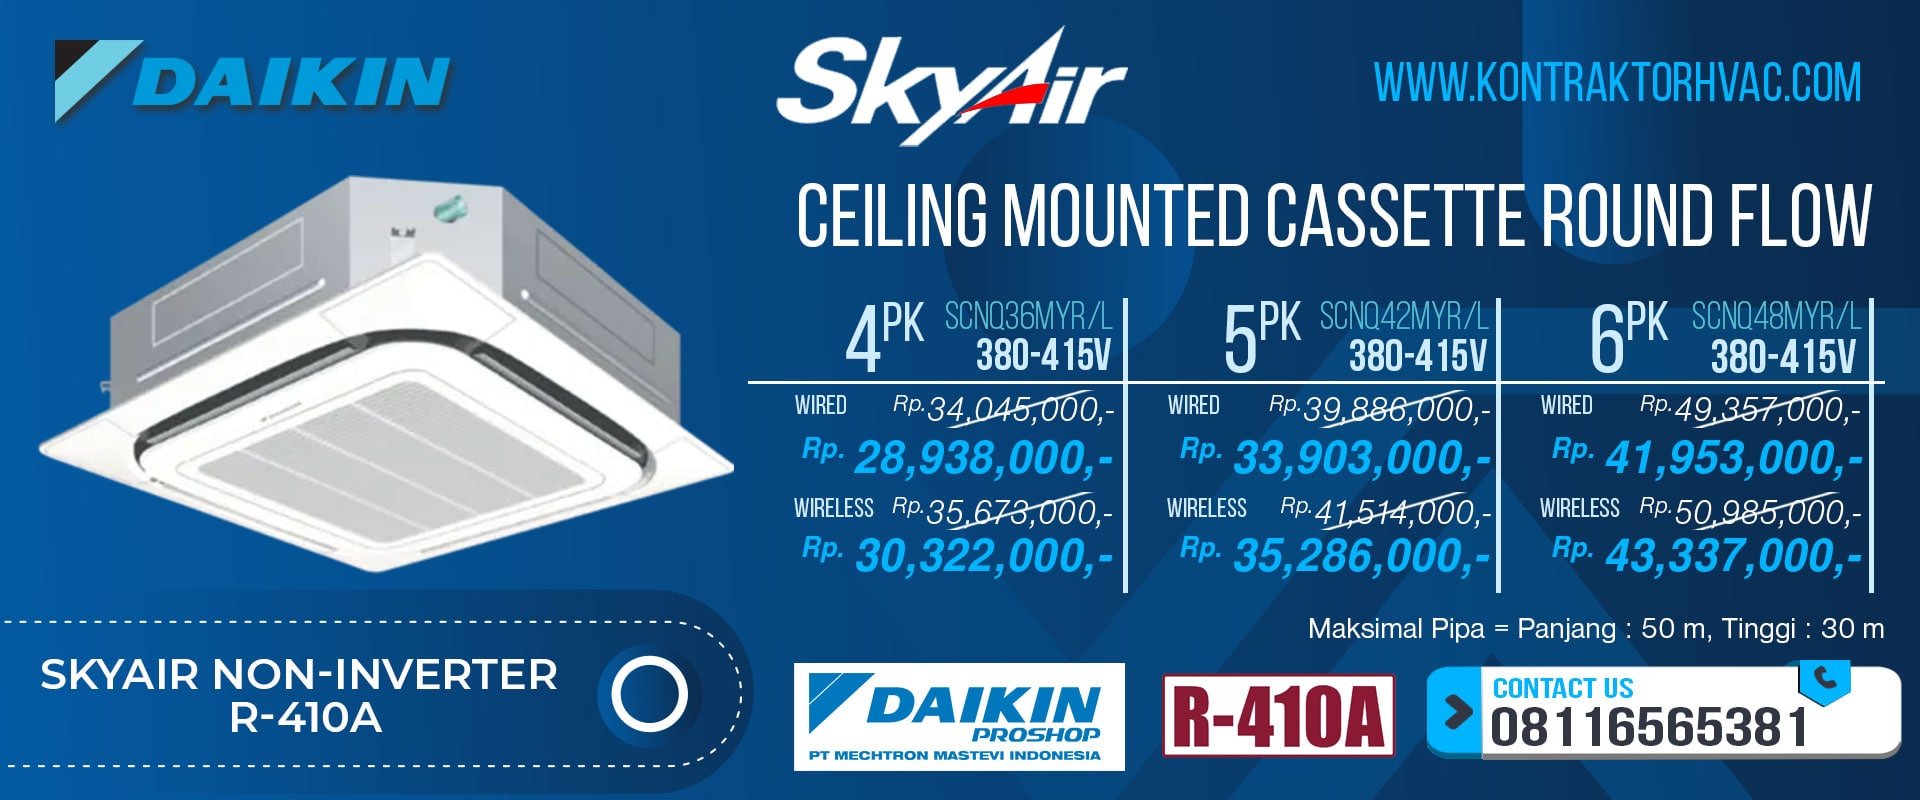 17.Skyair-Non-Inverter-R-410A-Ceiling-Mounted-Cassette-Round-Flow-Y-min (1)